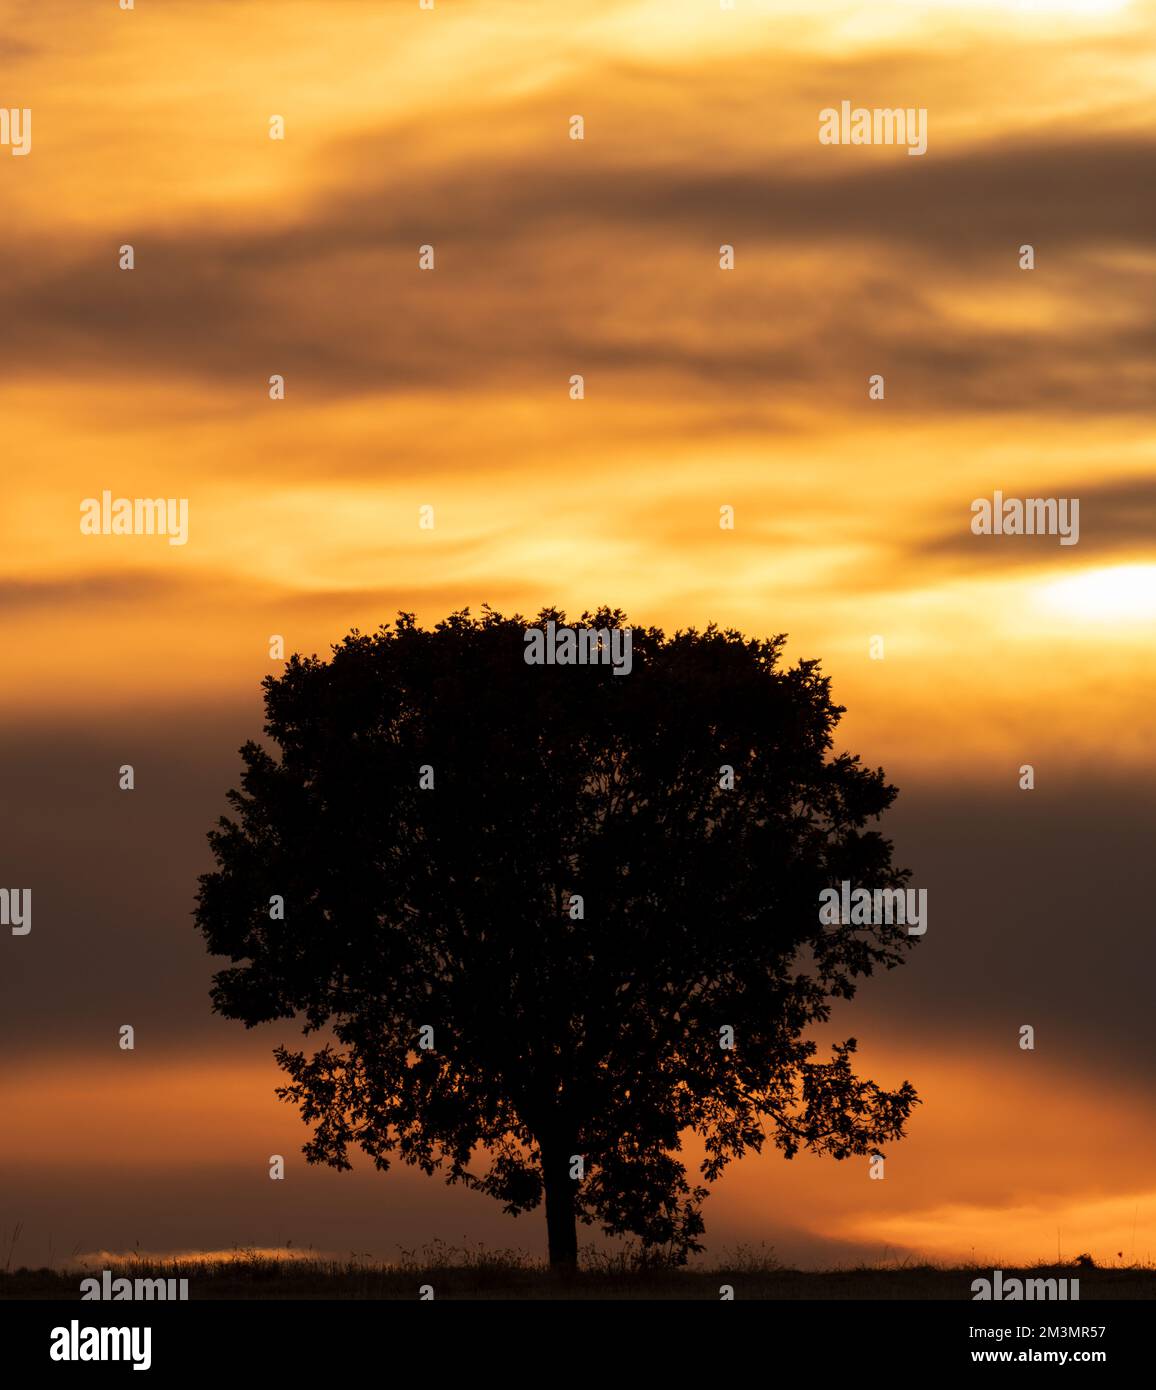 Isolated single tree silhouette at sunset with cloudy sky Stock Photo